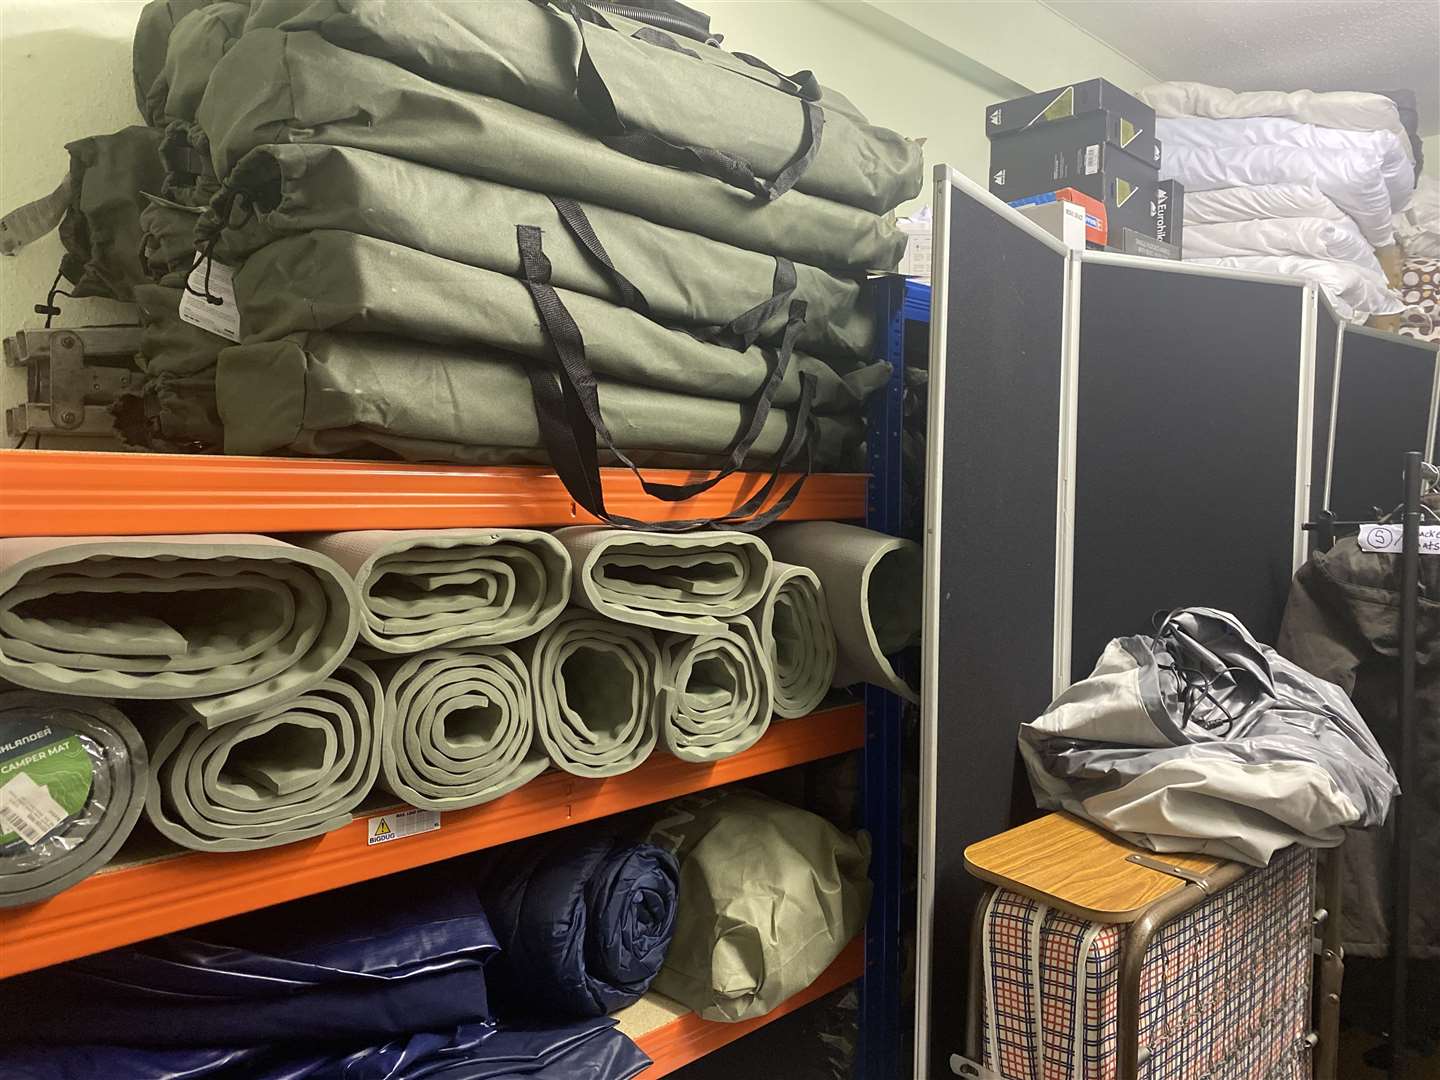 The store room is full of items to make the homeless as comfortable as possible